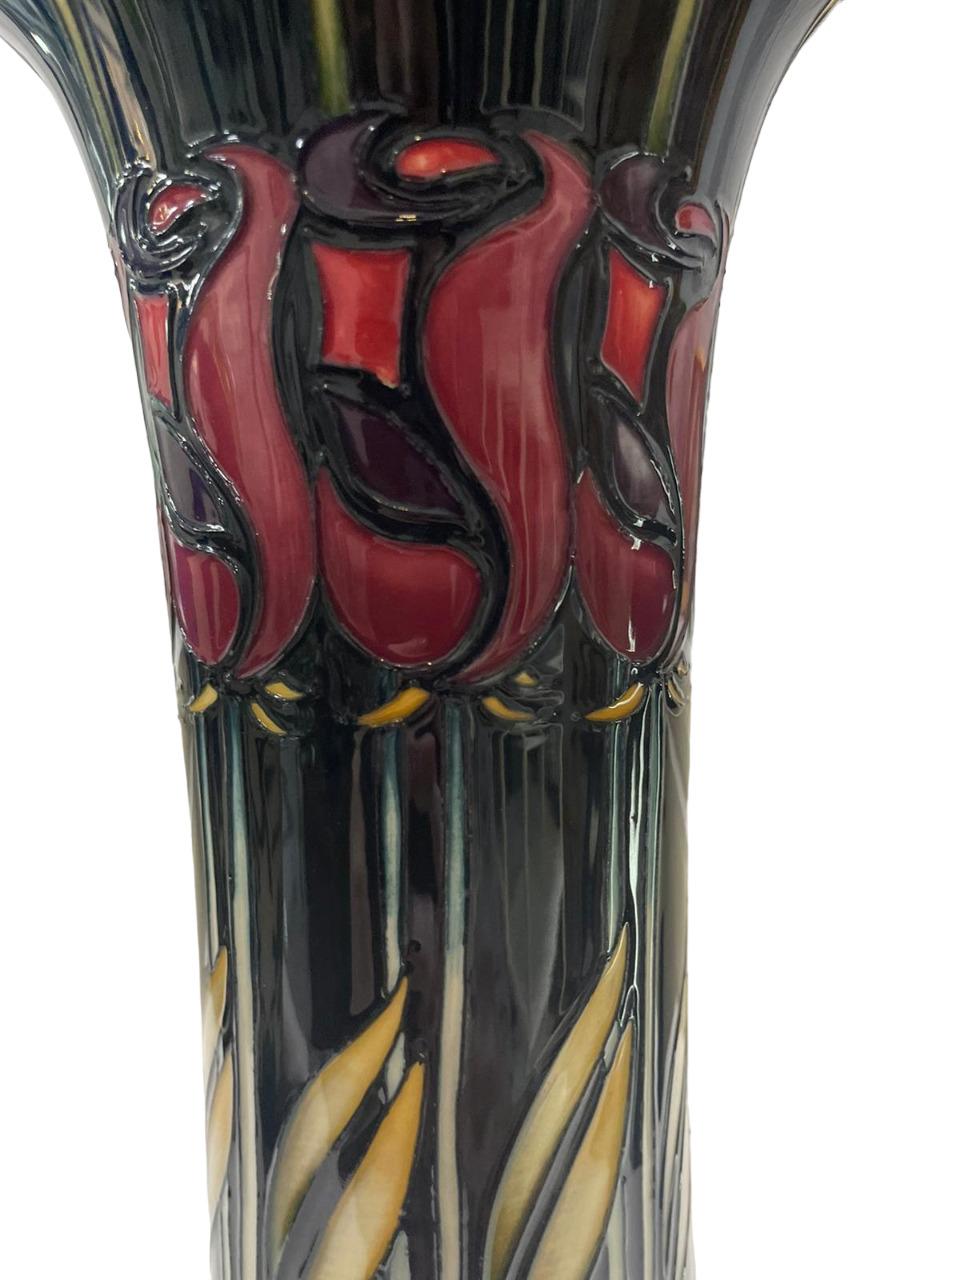 English DISCONTINUED MOORCROFT Night ROSE pattern by Nicola Slaney, dated 2000. Boxed For Sale